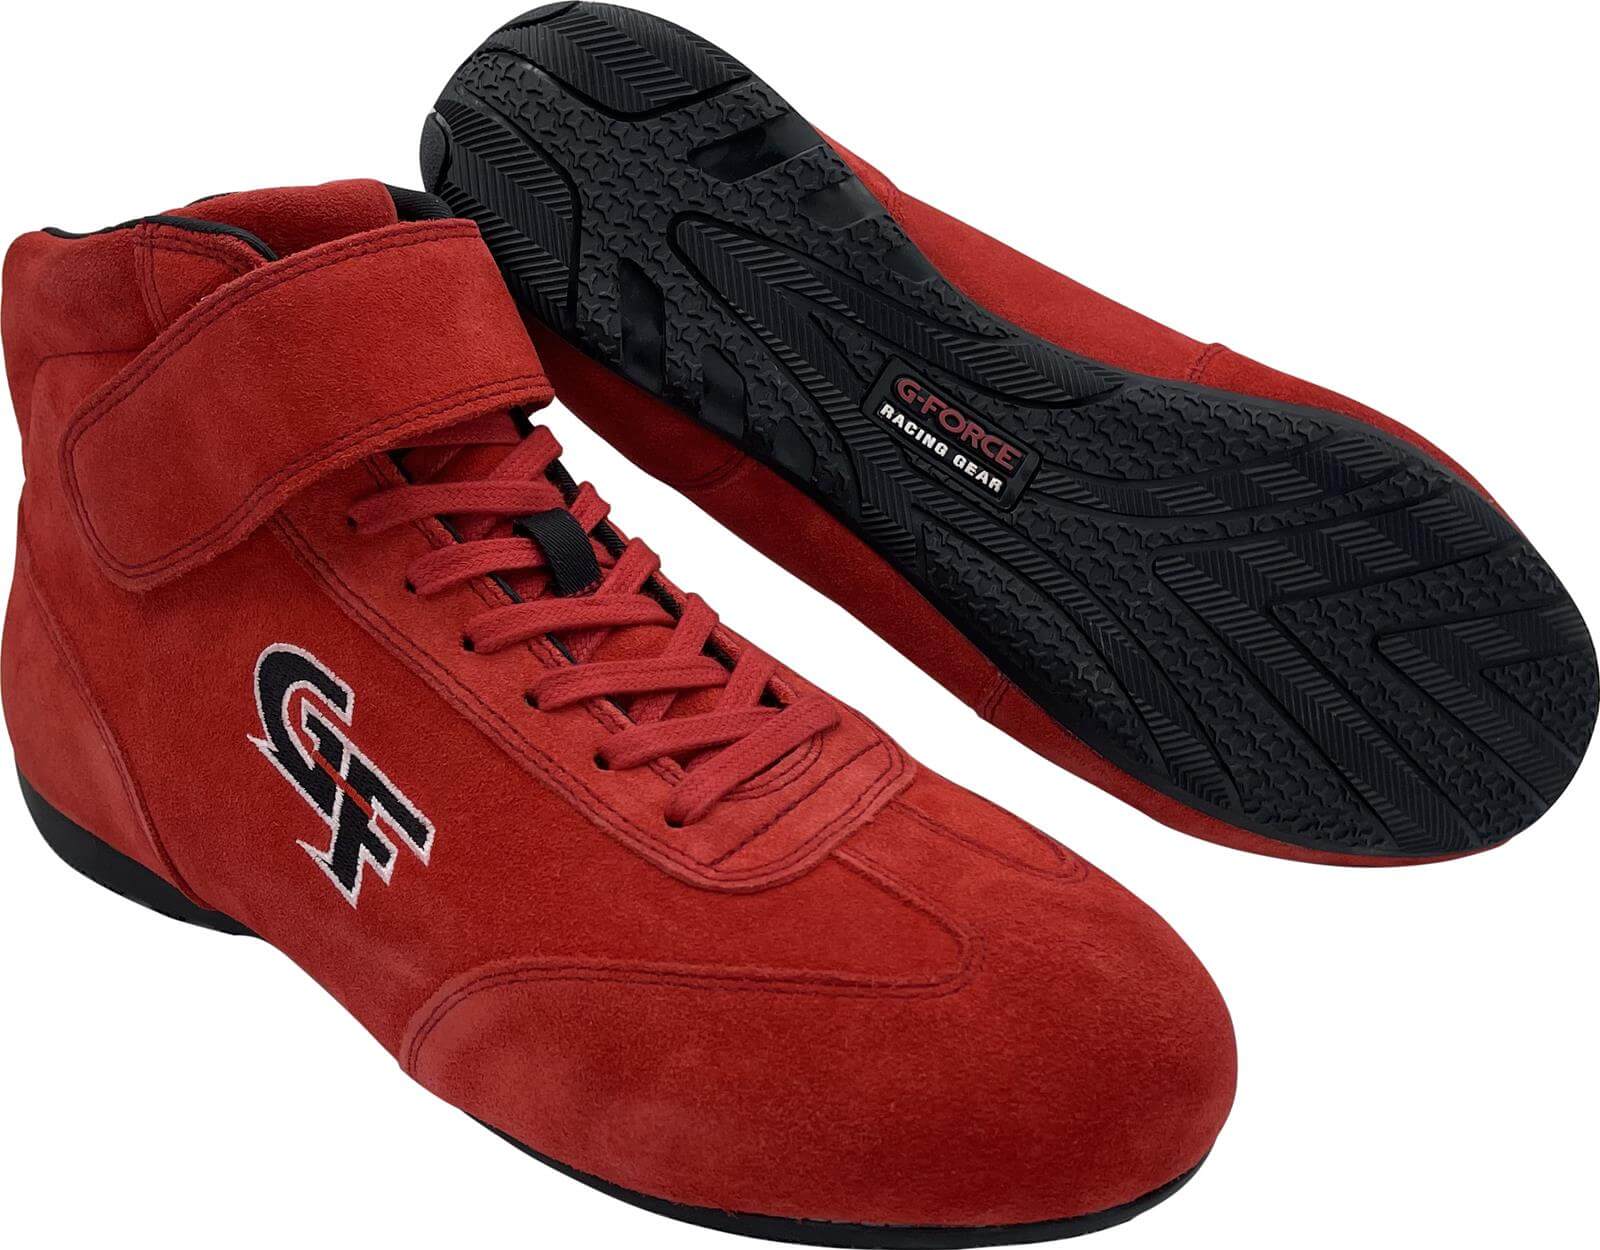 G35 Mid-Top Racing Shoes - $89.00